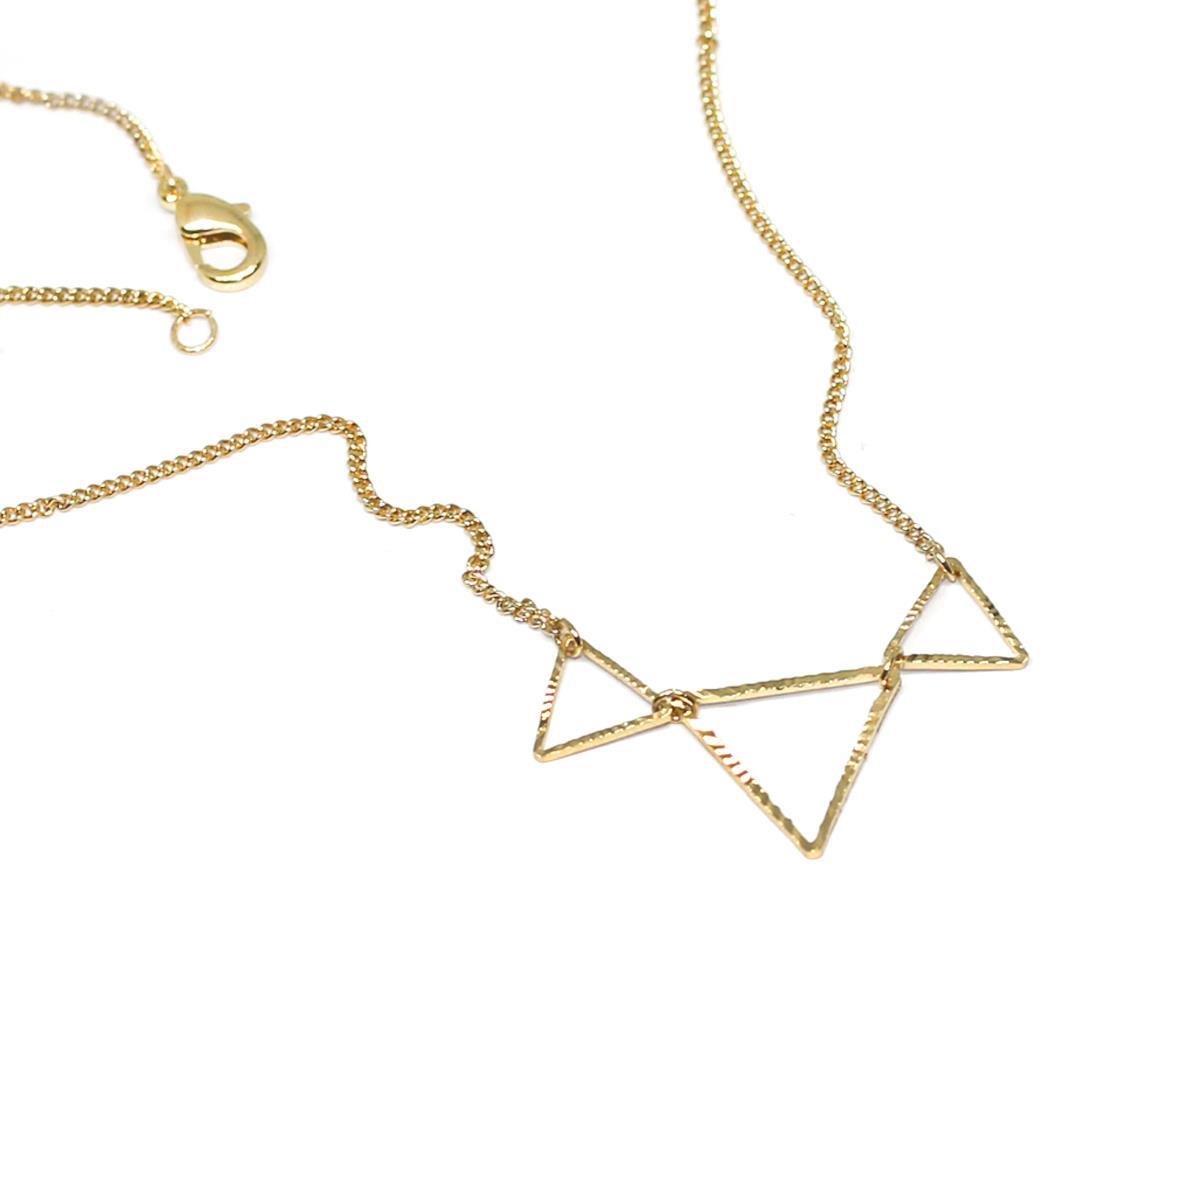 High Polish Triangle Necklace - Hutch.pk Online Fashion Store in Pakistan